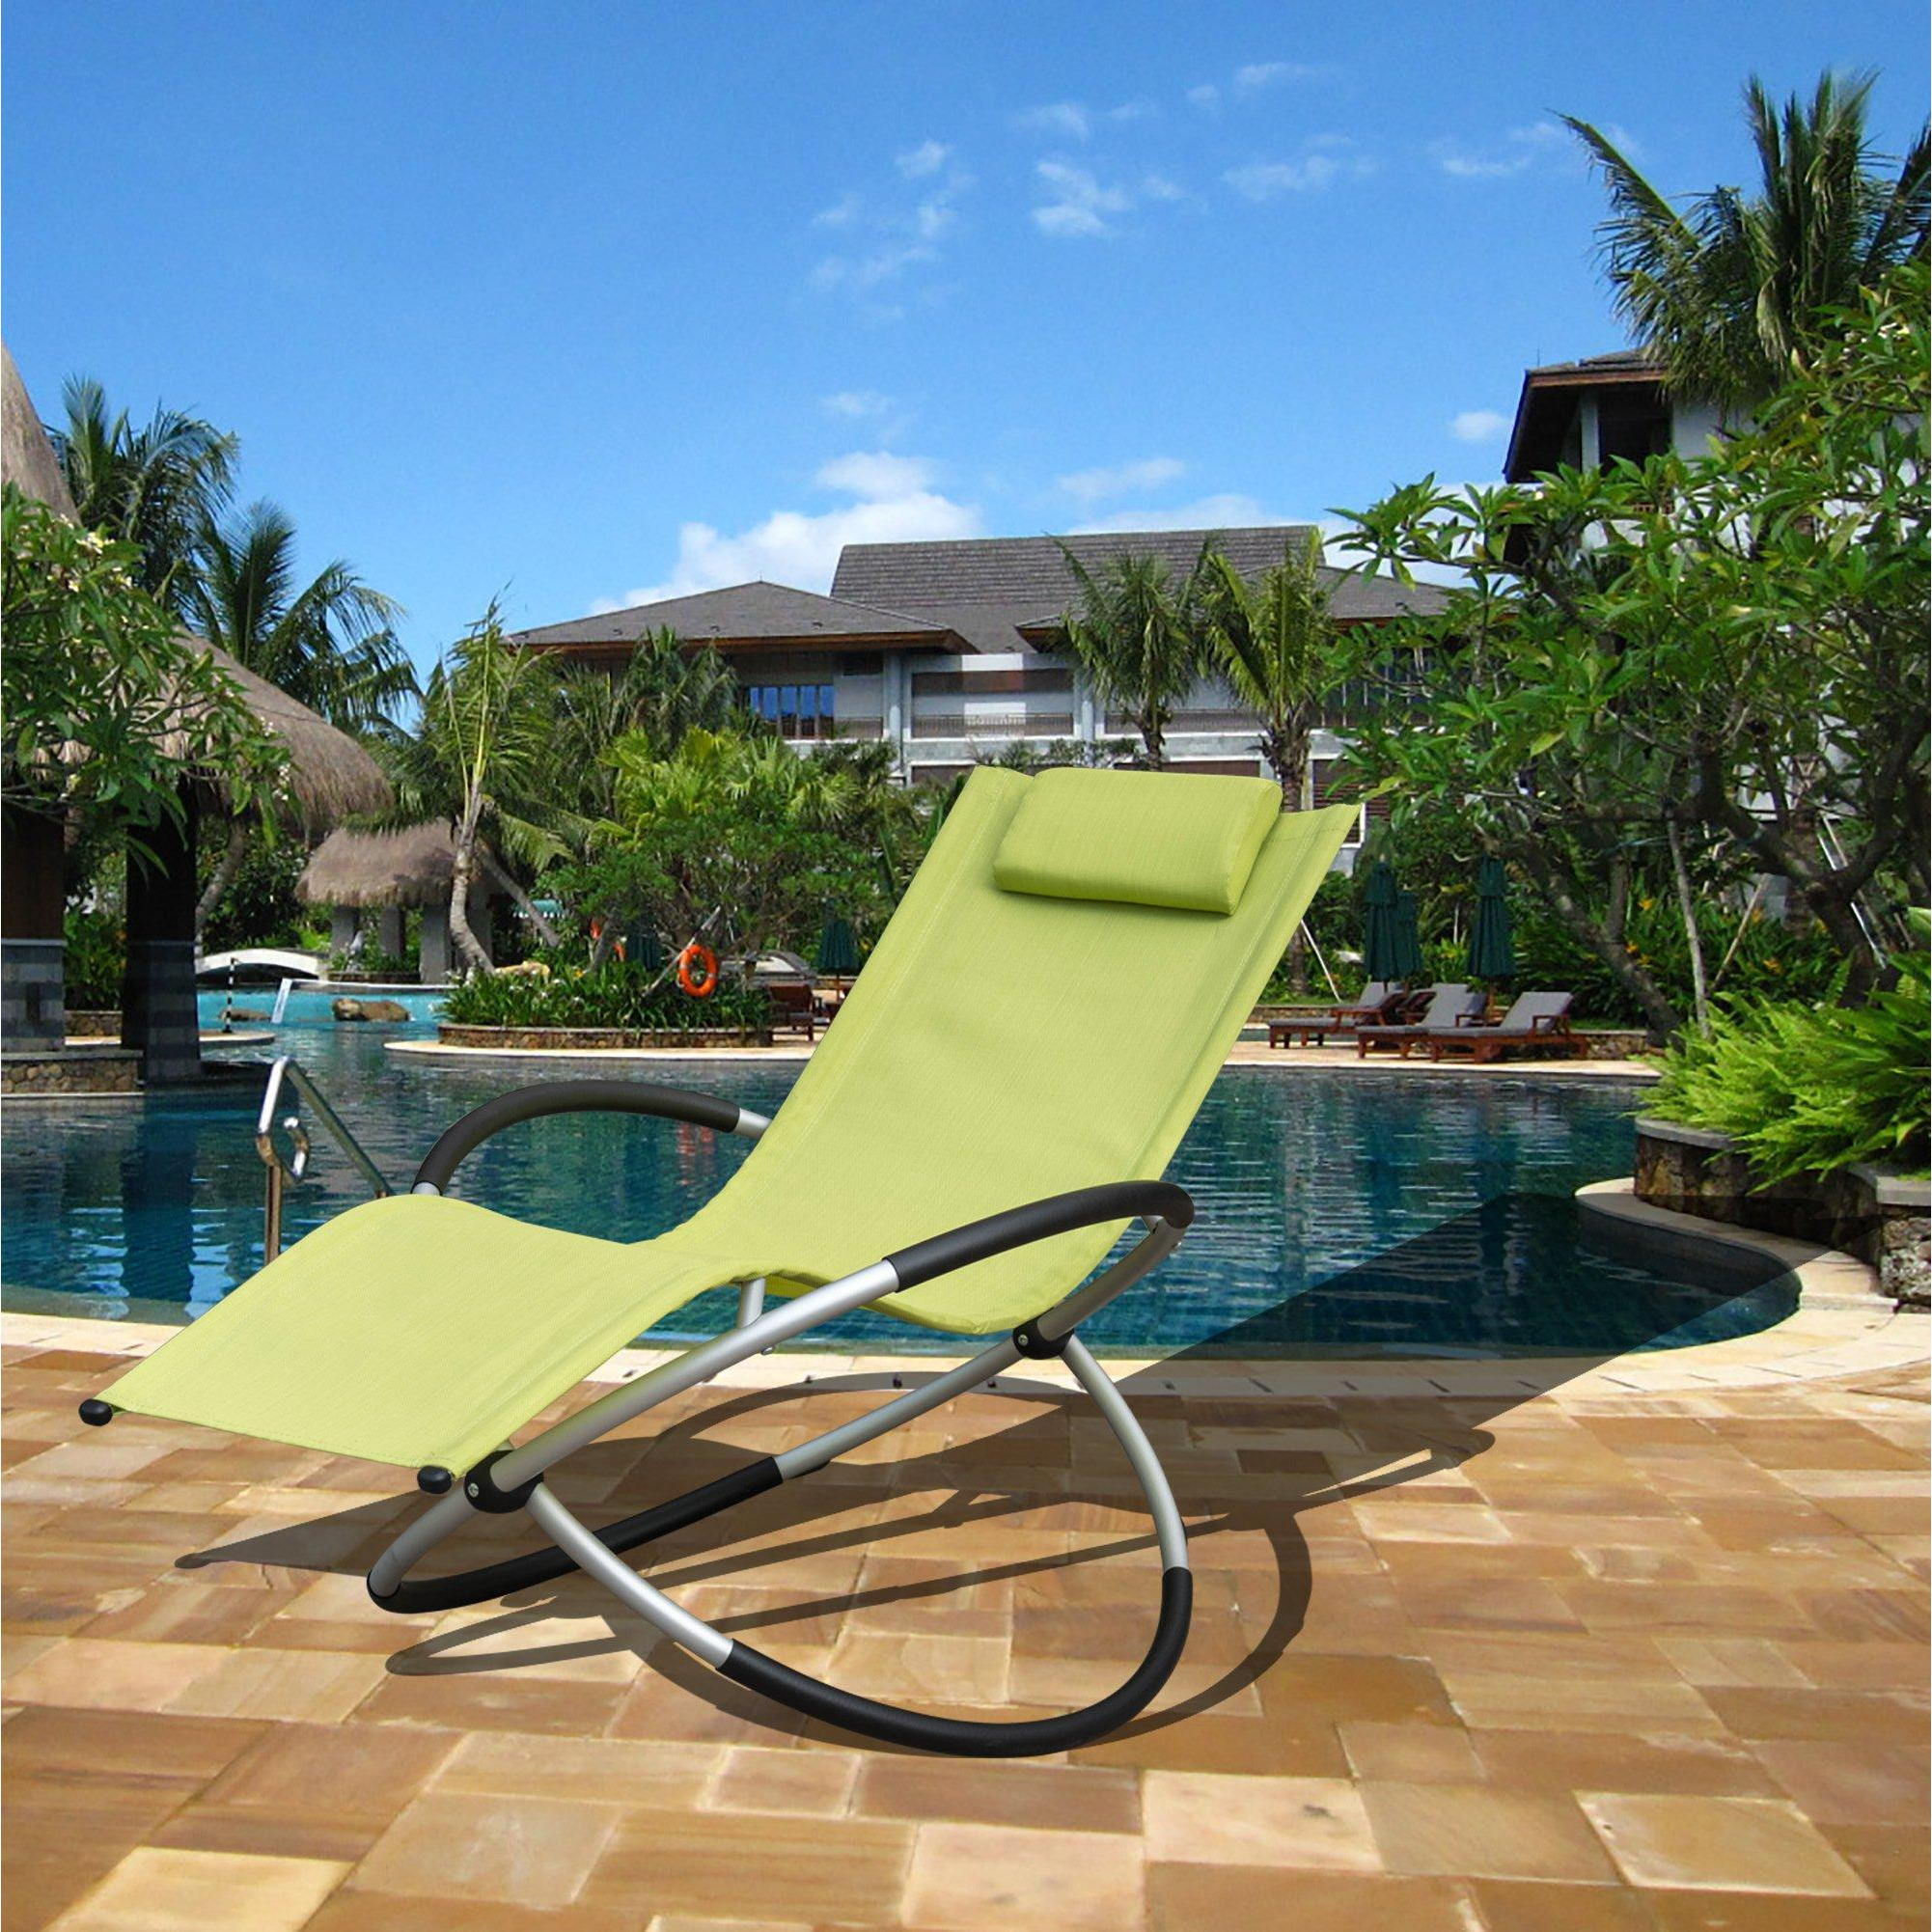 Zero Gravity Rocking Sun Lounger Chair with Pillow - image 1